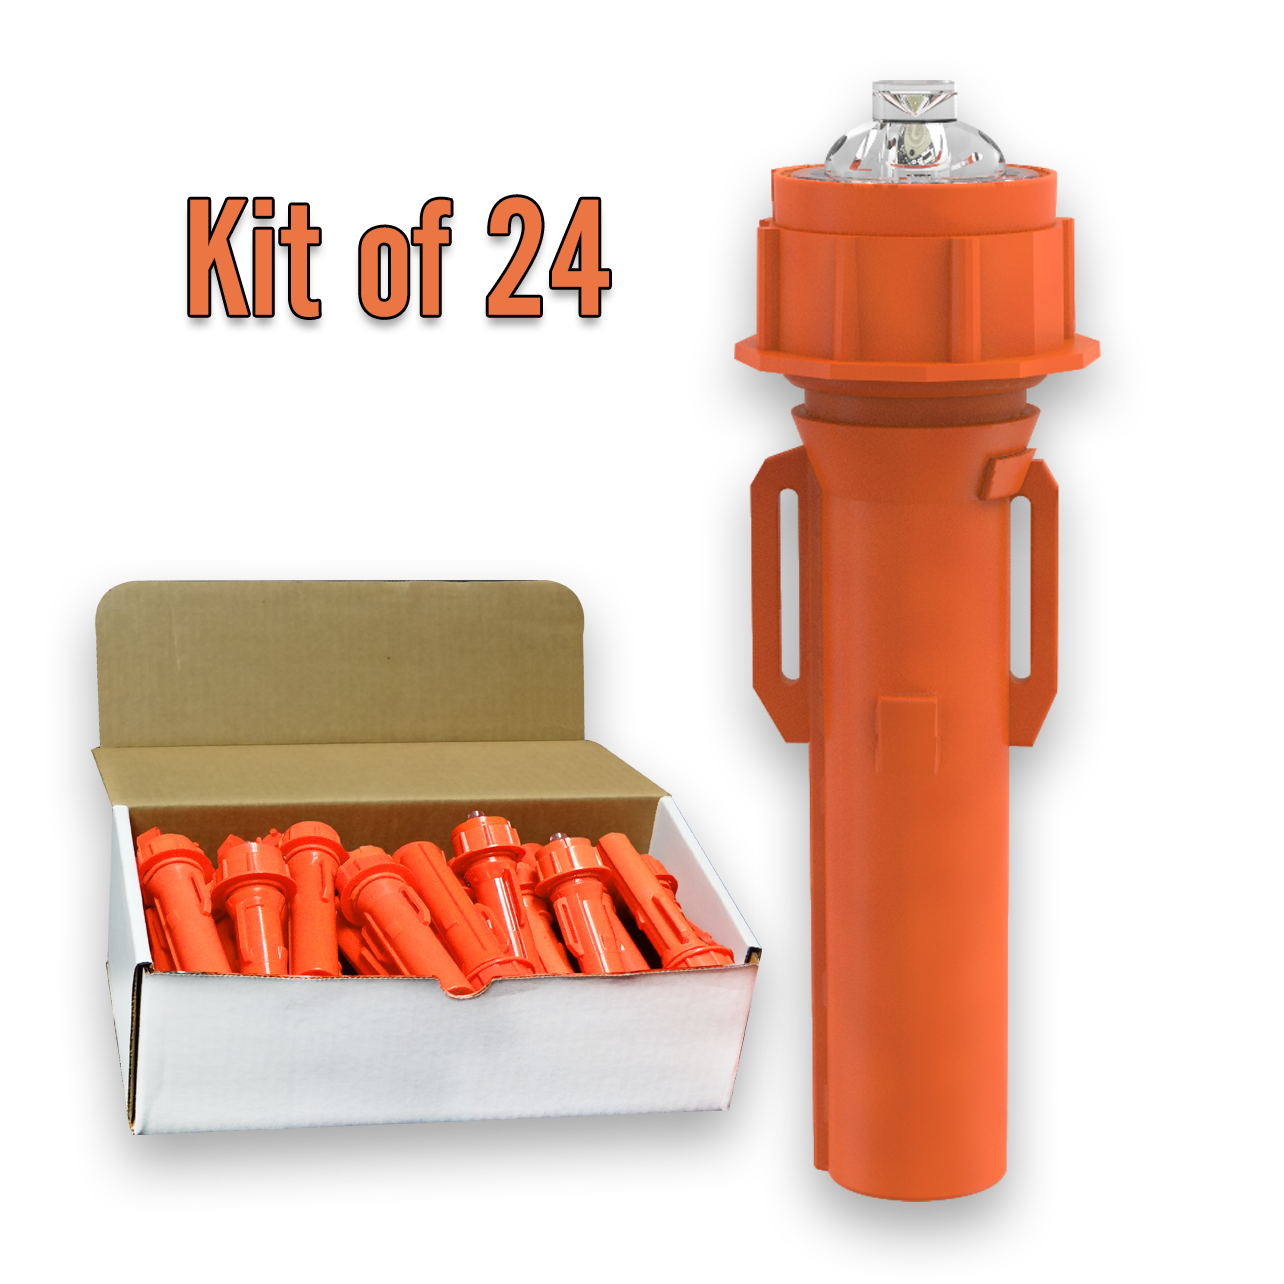 ThriftyFlare™ Cone S Kit #6161 (For Standard Traffic Cones)